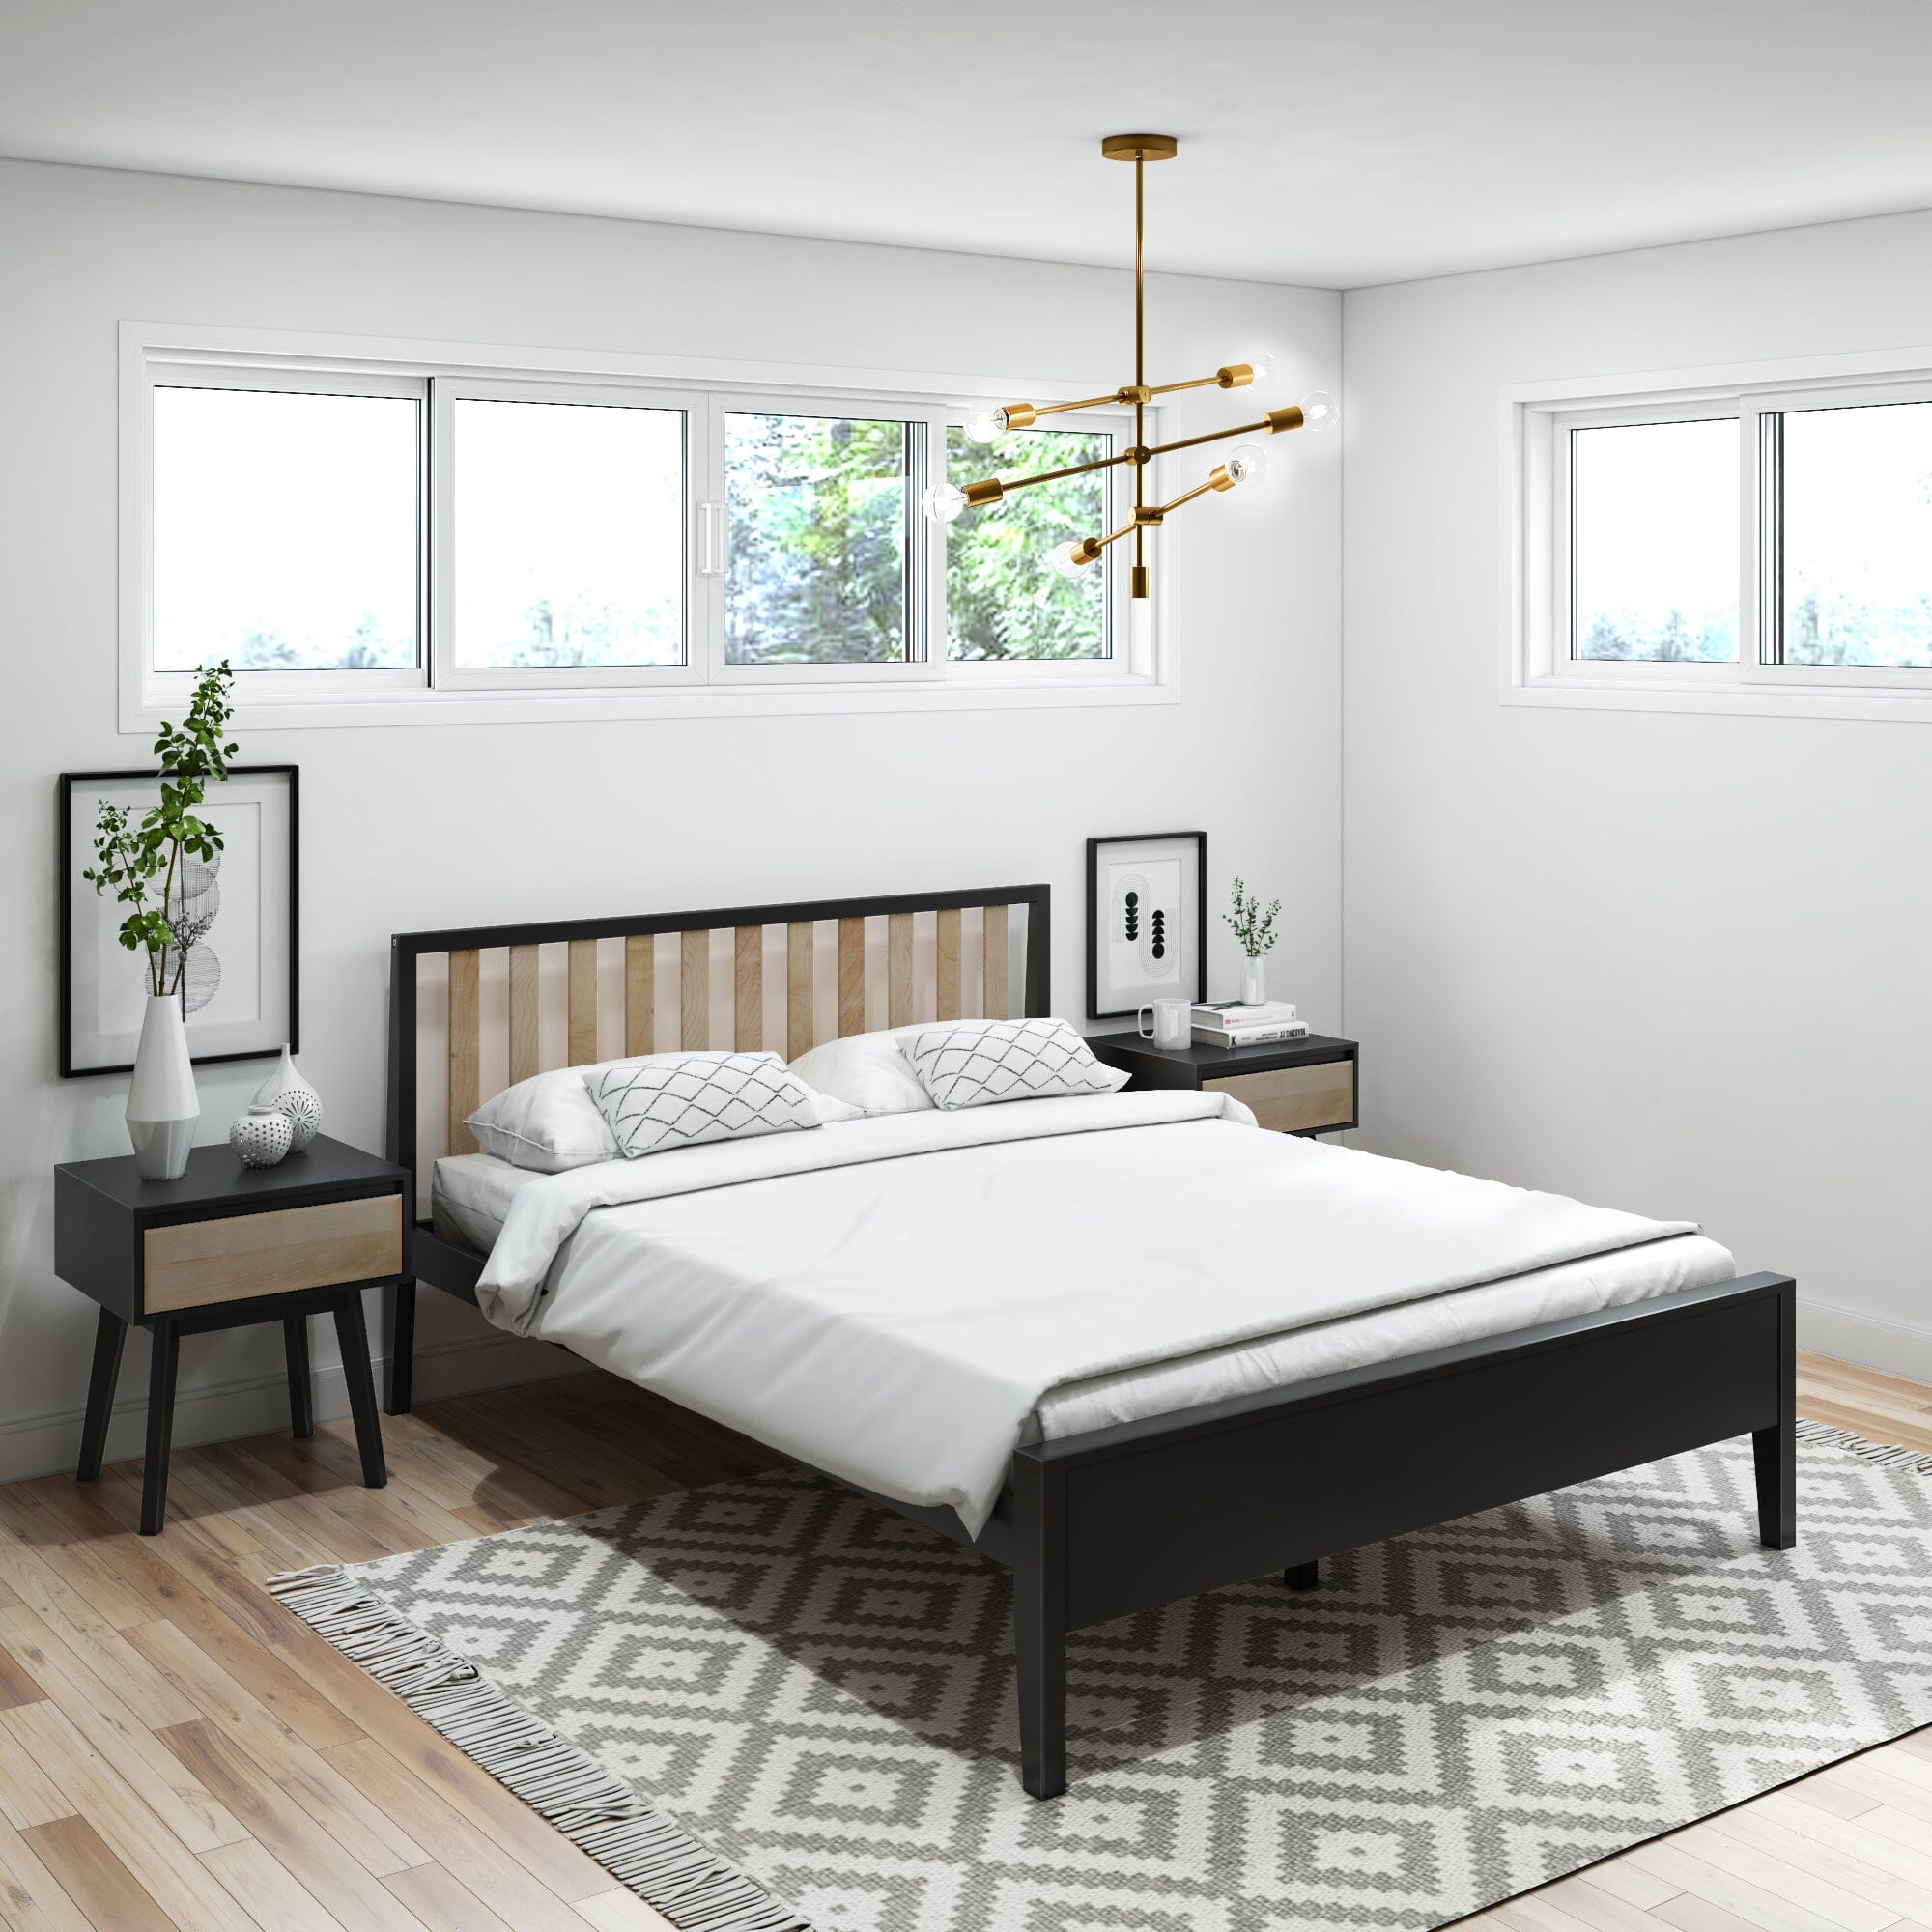 How to Create a Modern Bedroom with Scandinavian Style